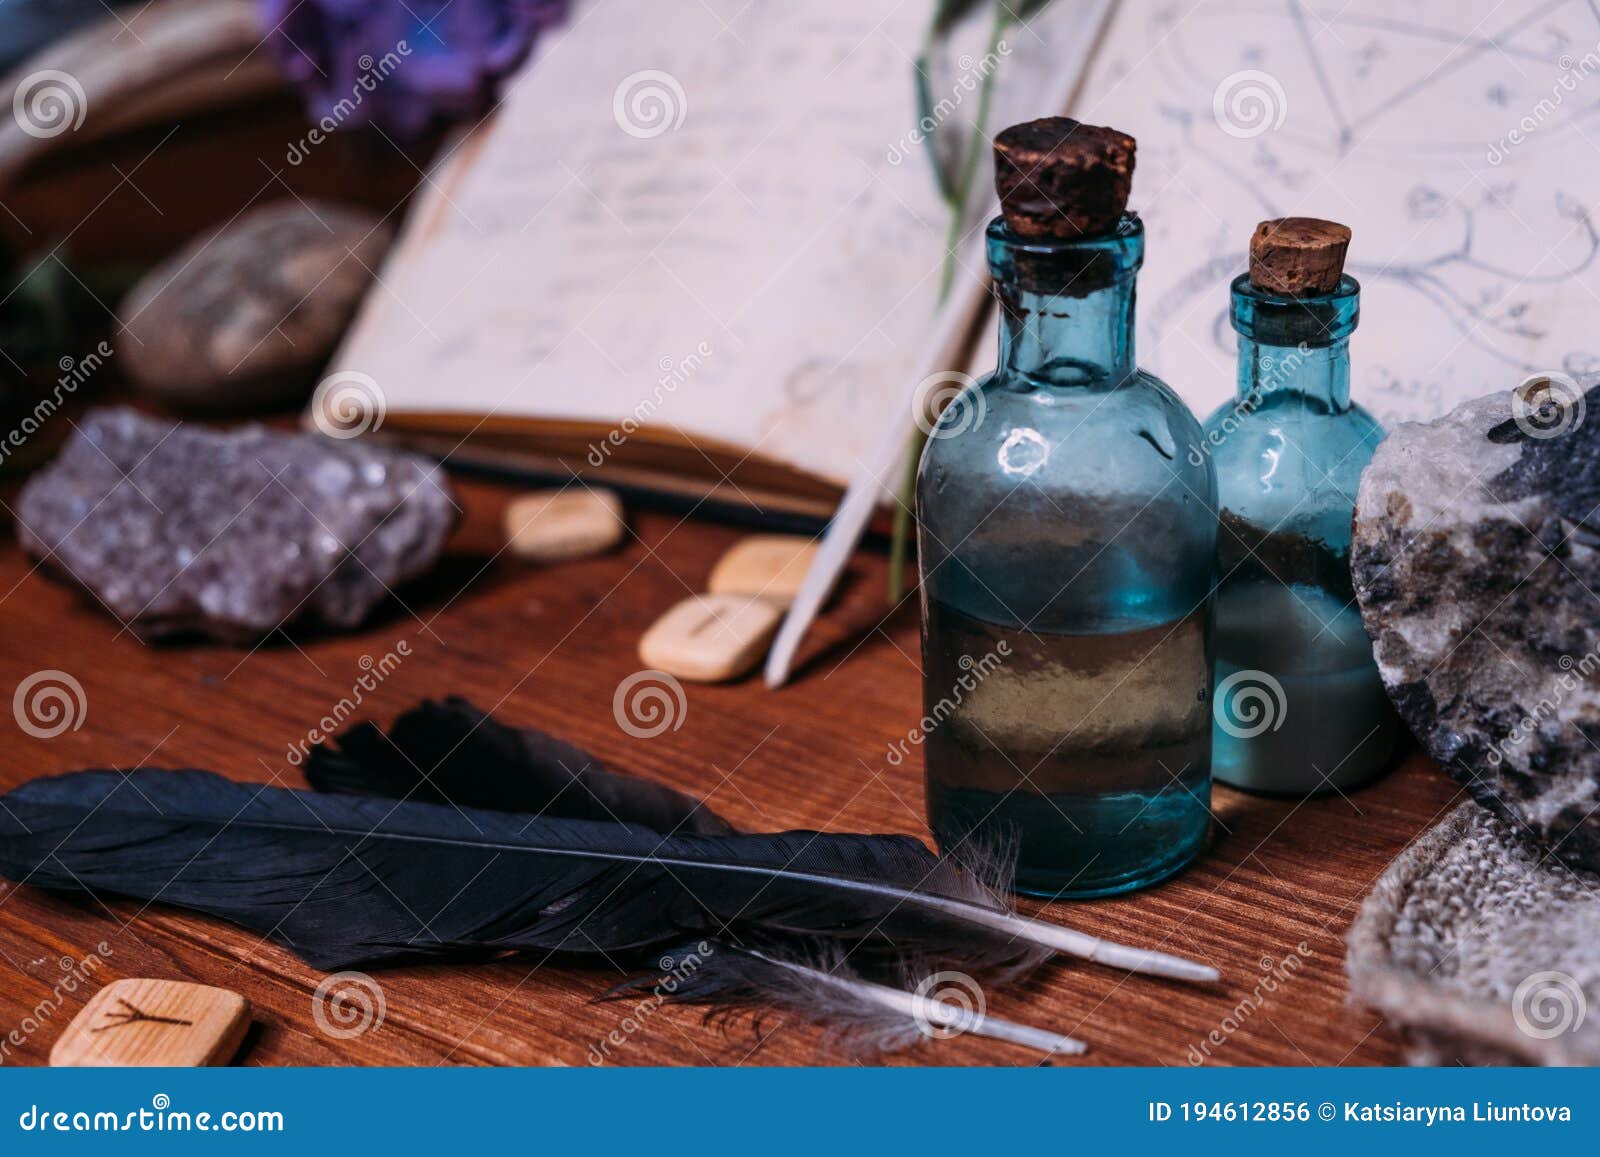 Witchcraft Concept with Potions, Herbs and Occult Equipment Stock Photo